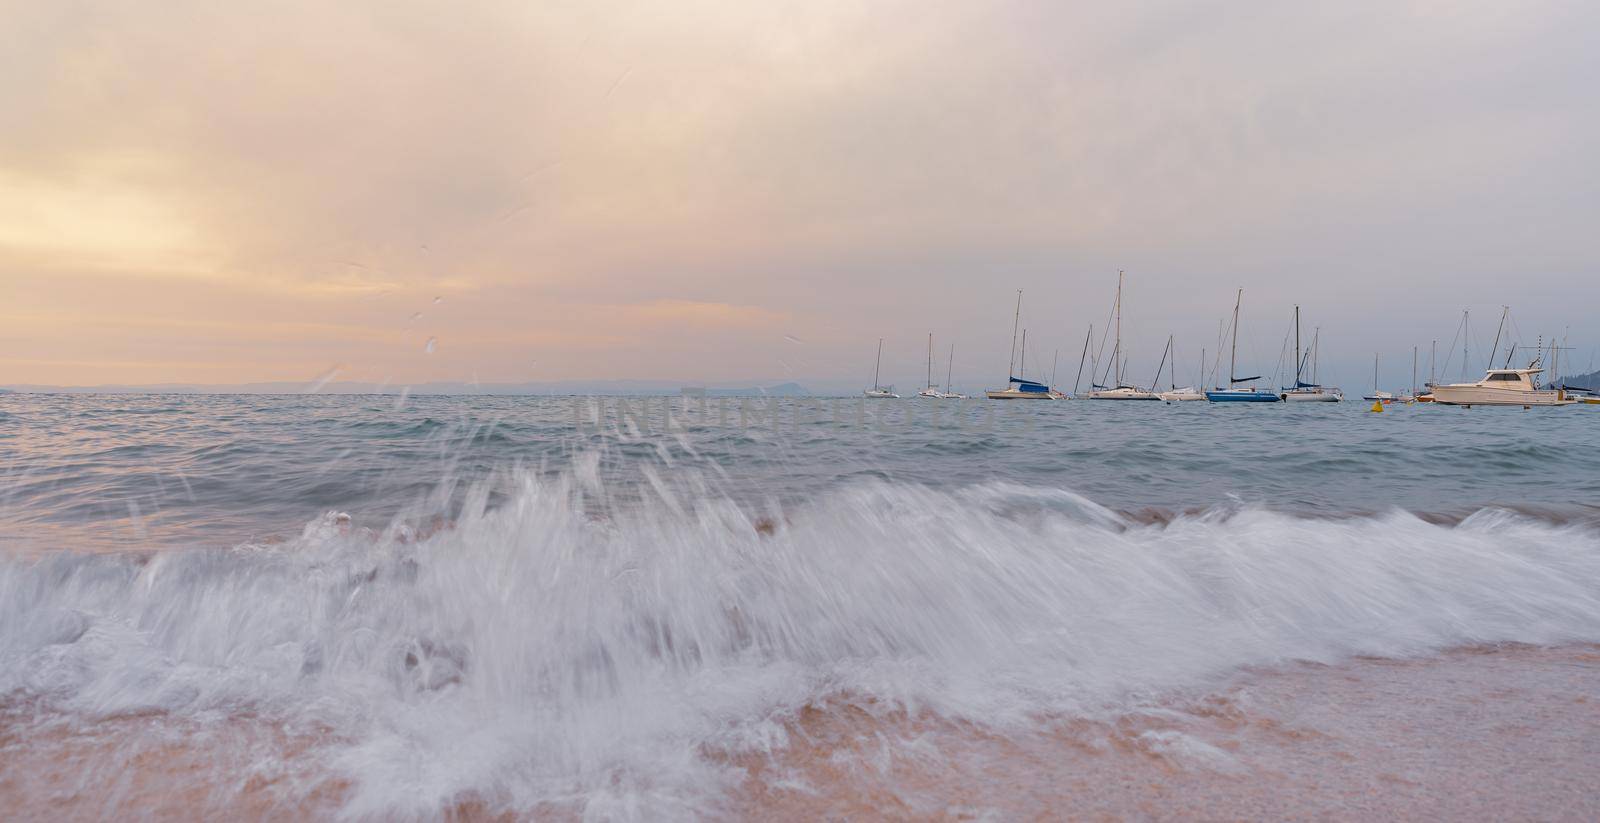 At sunset the waves break on the beach in front of boats by brambillasimone